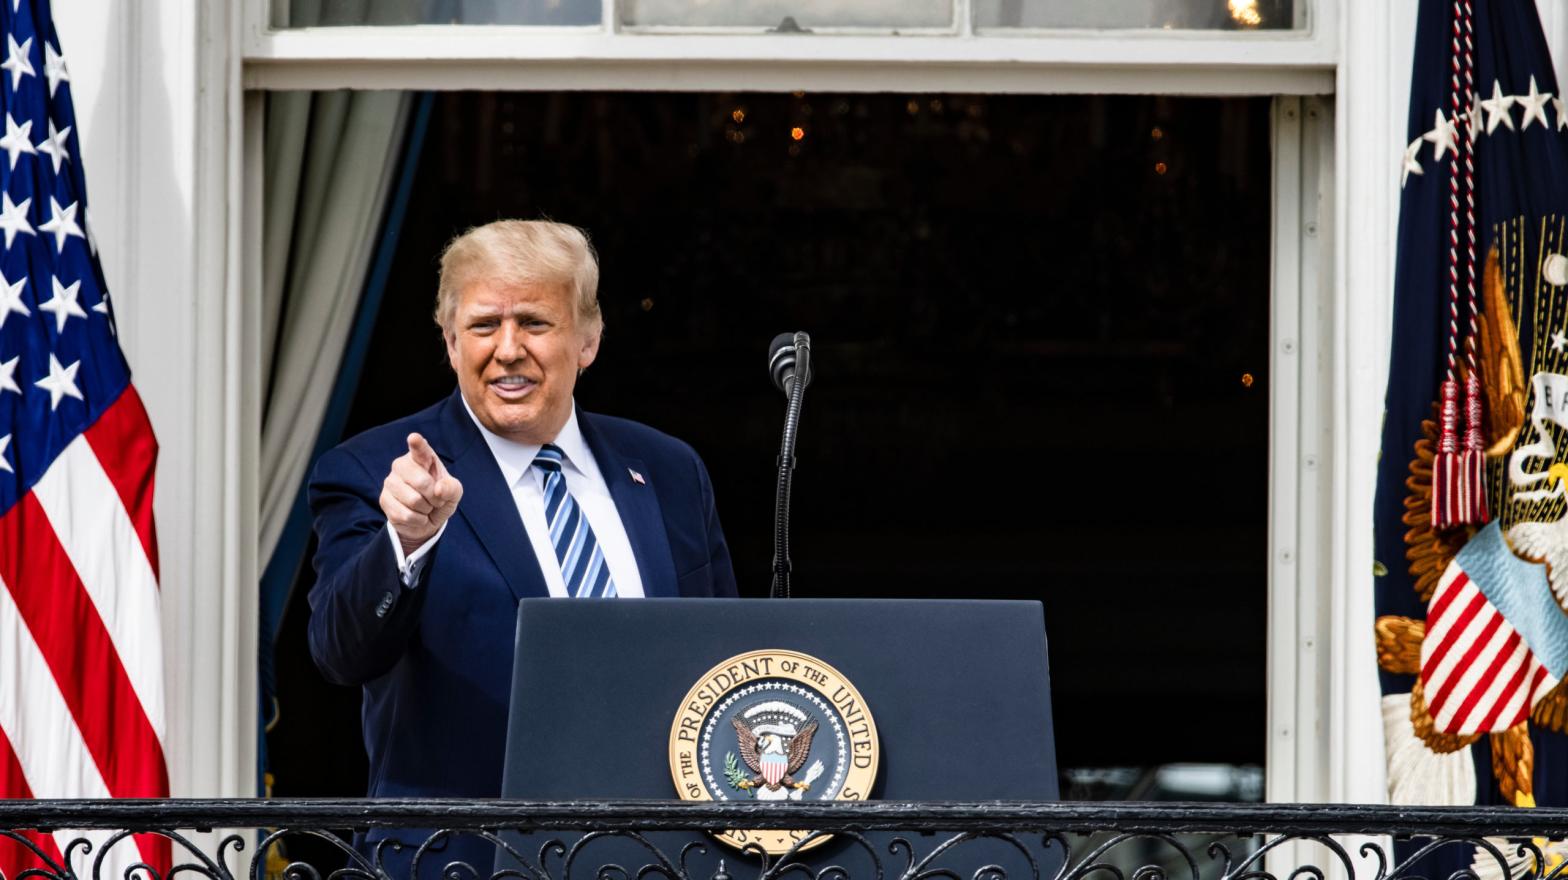 U.S. President Donald Trump addresses a rally in support of law and order on the South Lawn of the White House on October 10, 2020 in Washington, D.C. (Photo: Samuel Corum, Getty Images)